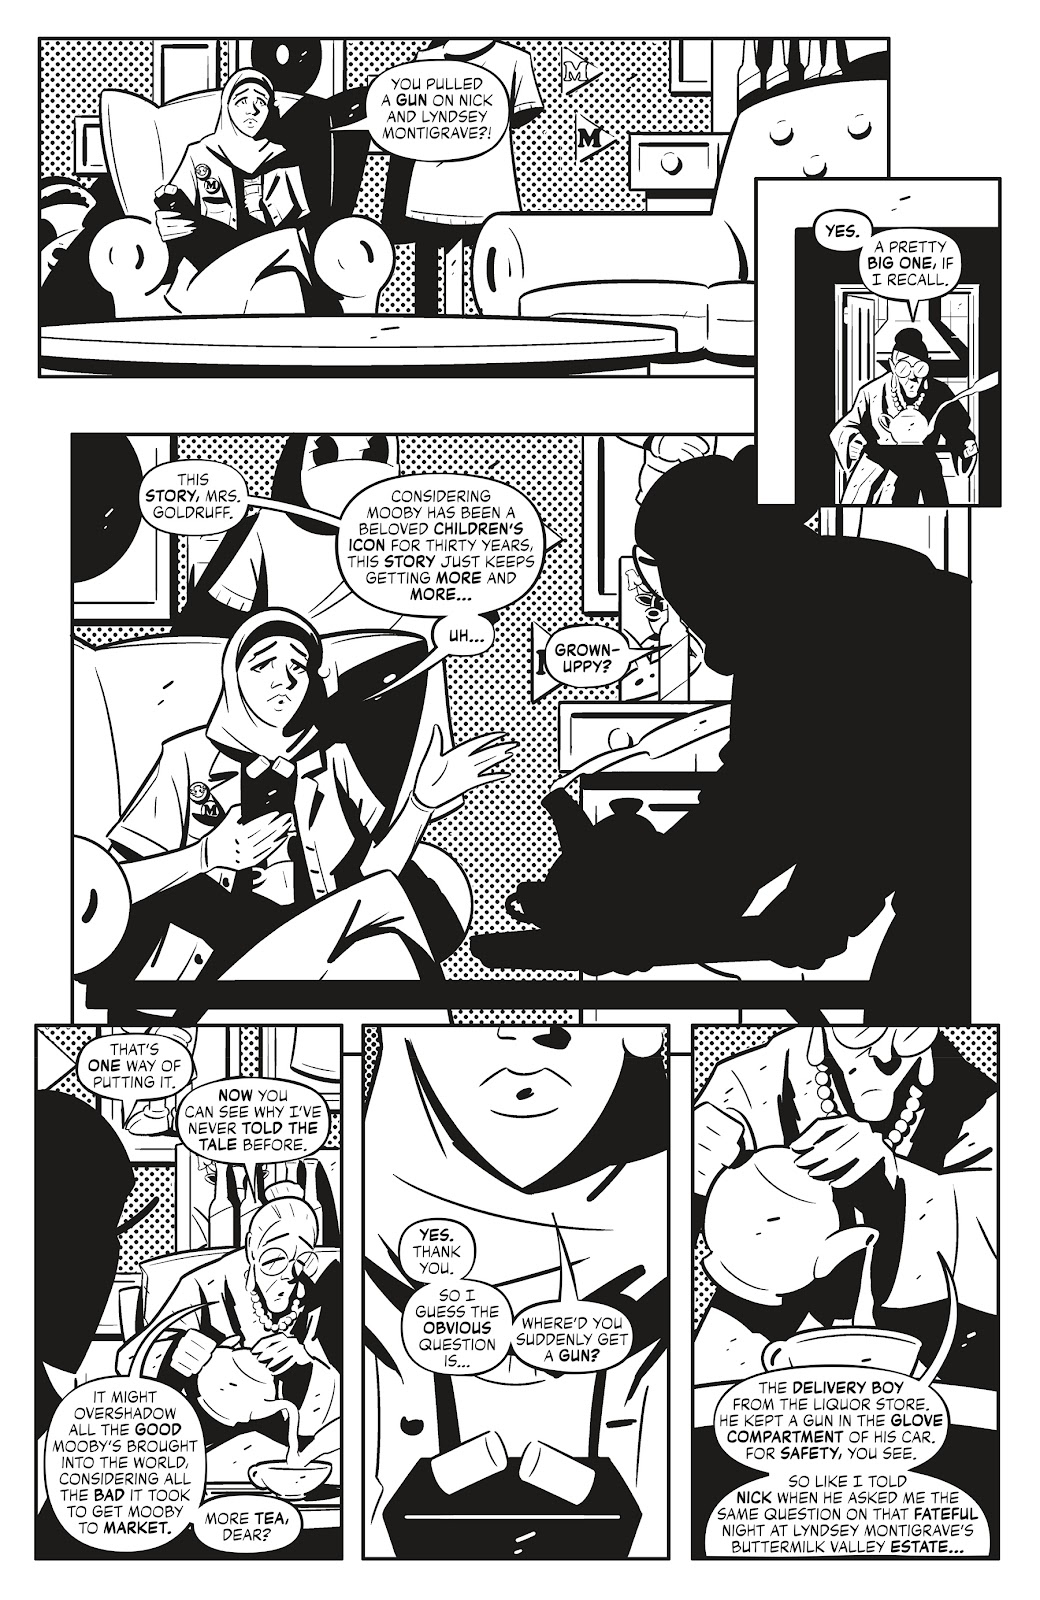 Quick Stops Vol. 2 issue 3 - Page 3